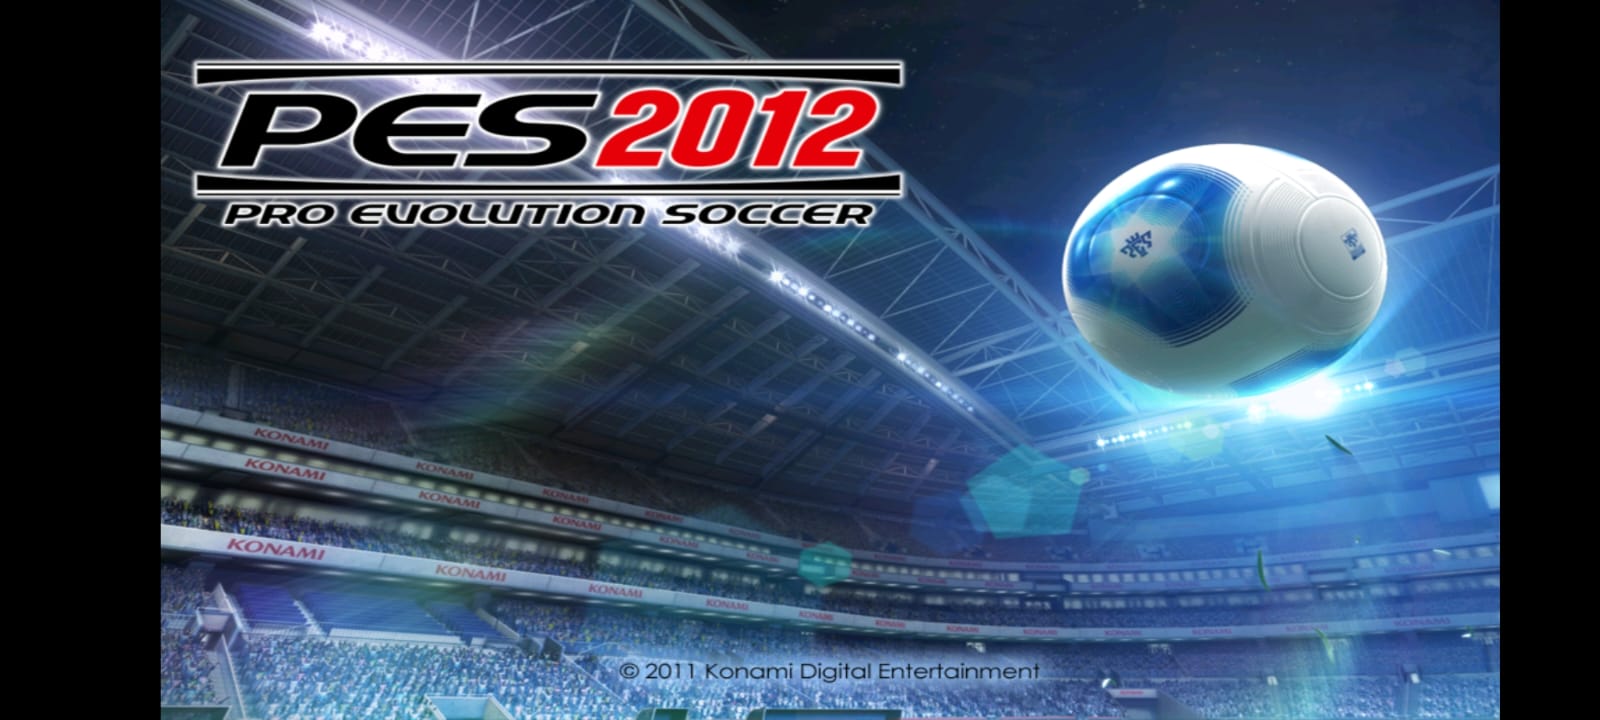 Download and Install PES 2012 APK On Android Phone + Data